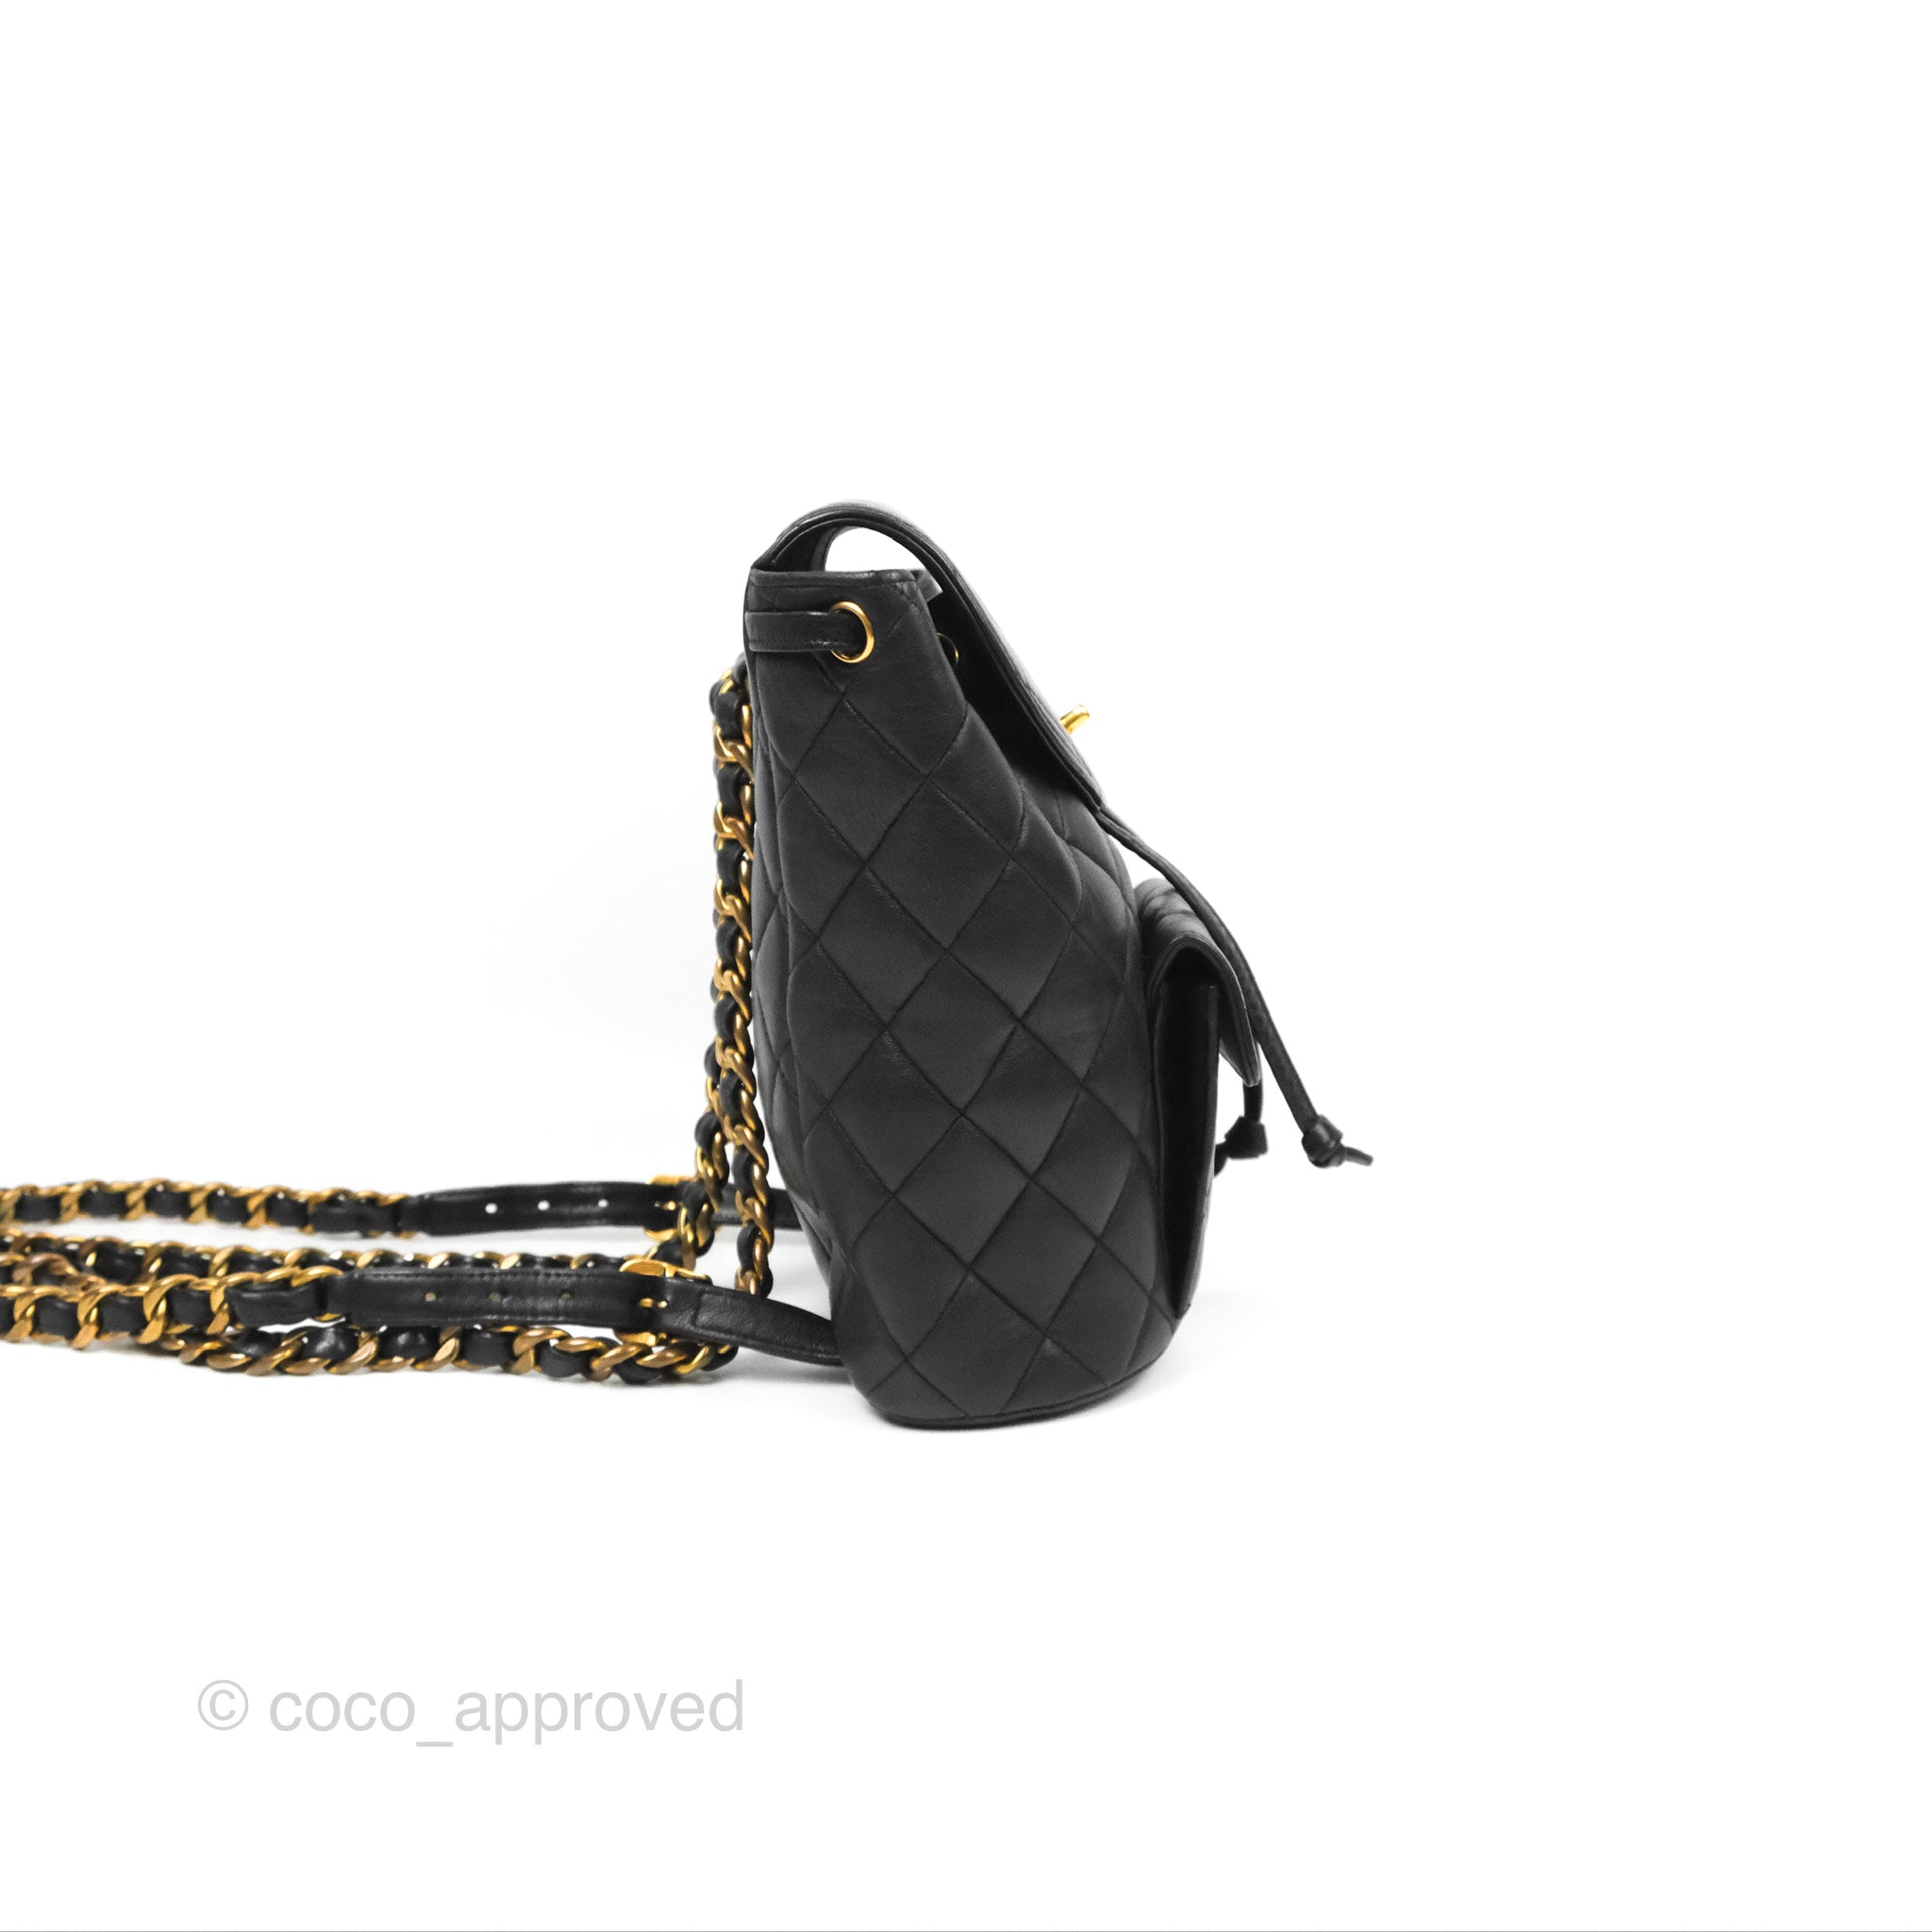 Chanel Black Lambskin Quilted Duma Backpack